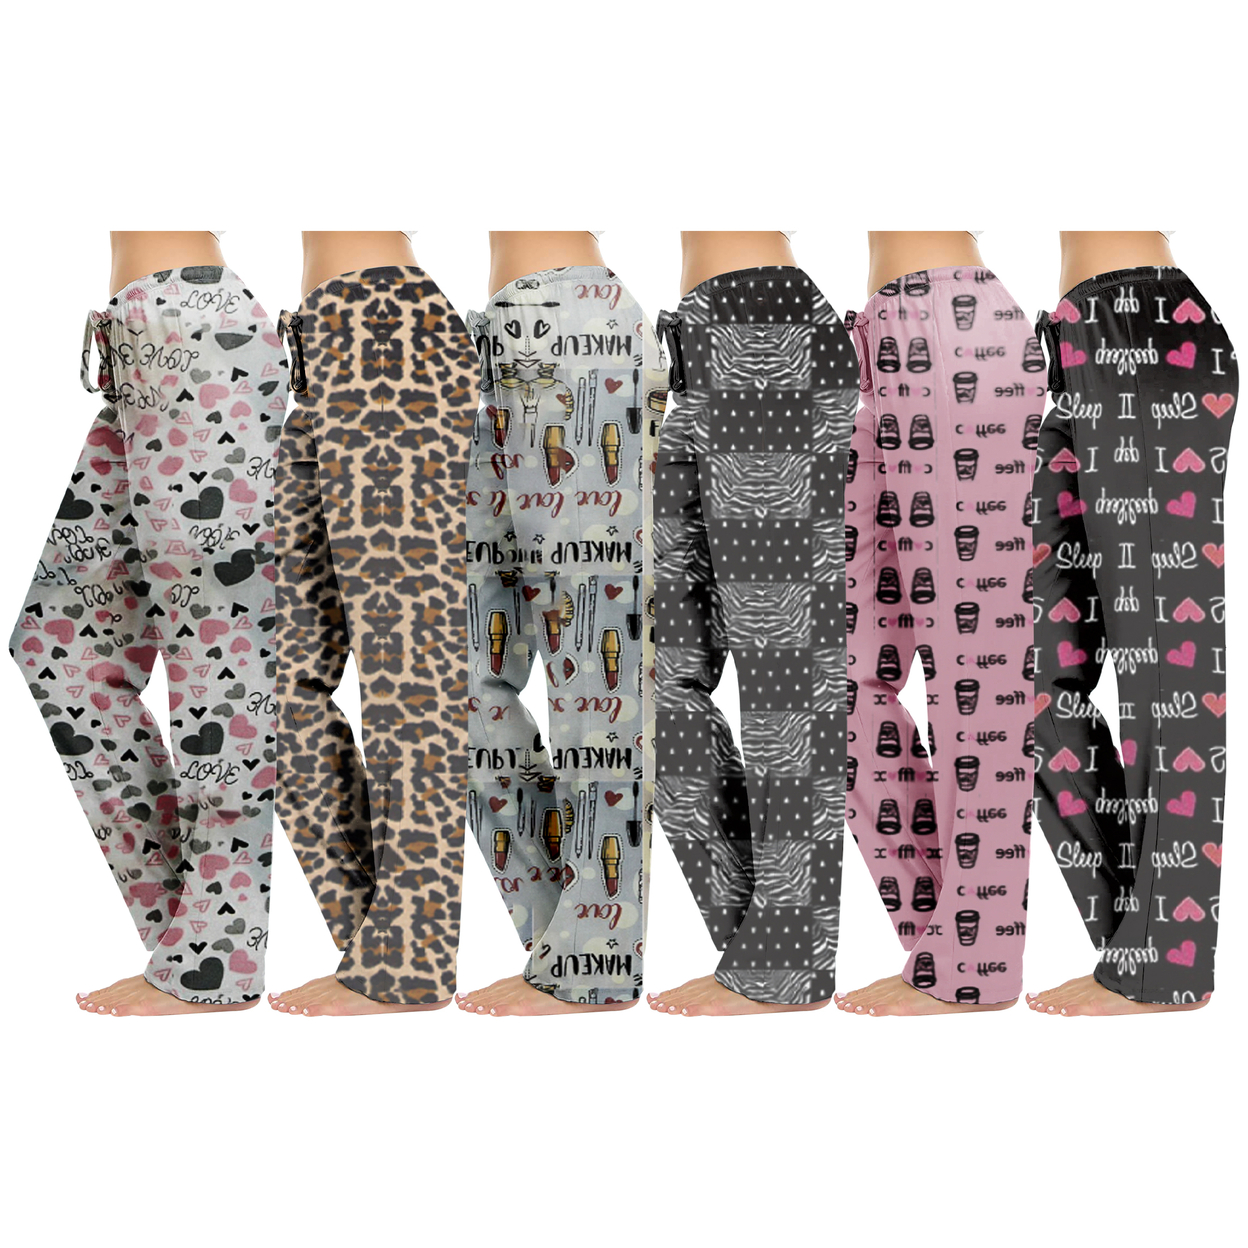 2-Pack: Women's Casual Fun Printed Lightweight Lounge Terry Knit Pajama Bottom Pants - X-large, Shapes